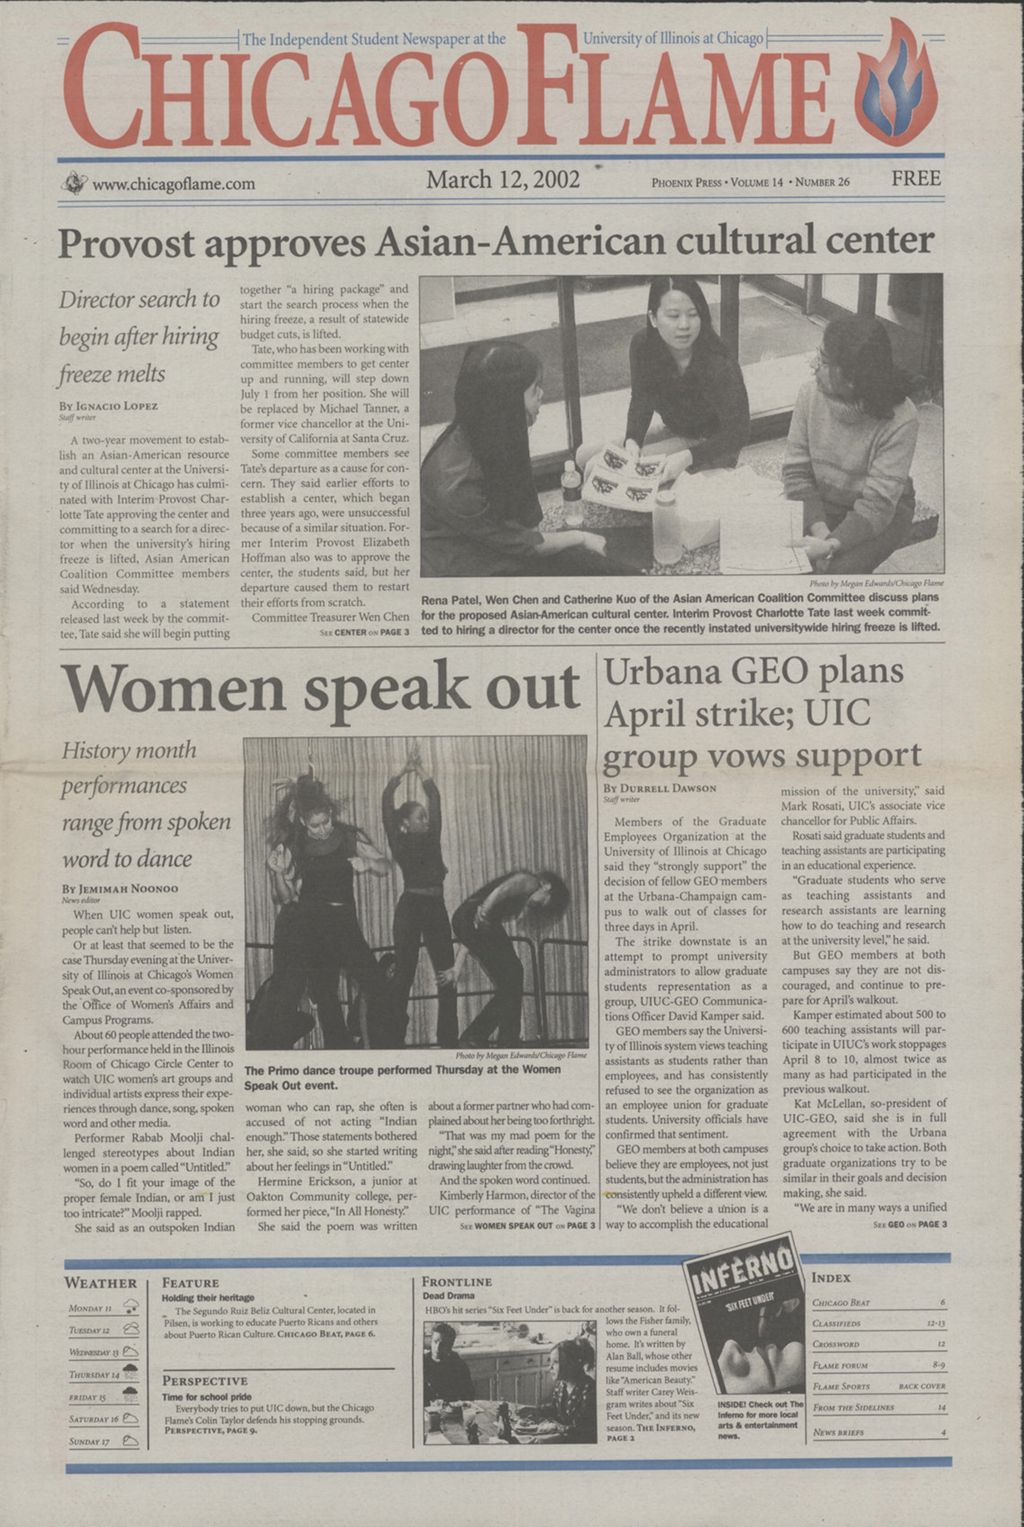 Chicago Flame (March 12, 2002)